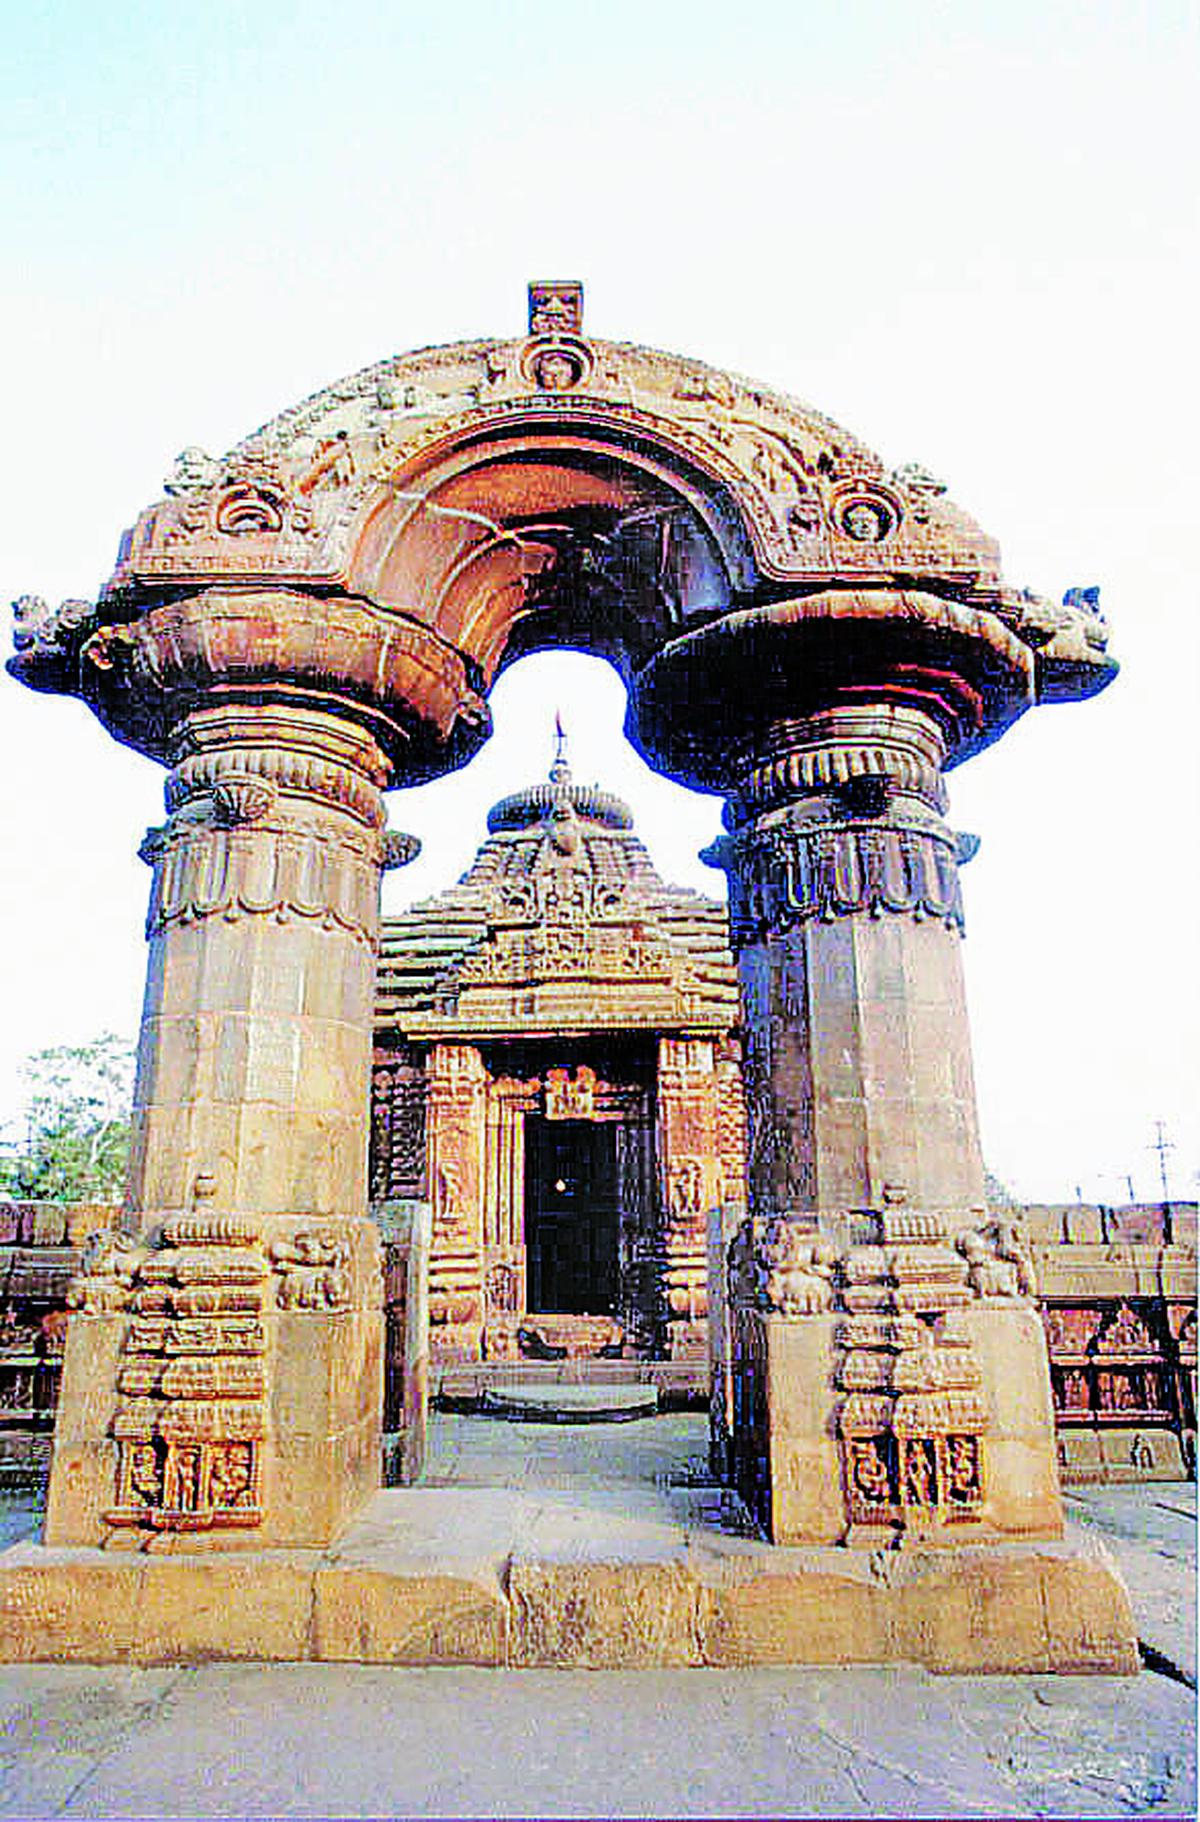 The carved Toran of the Mukteshwar Temple. 